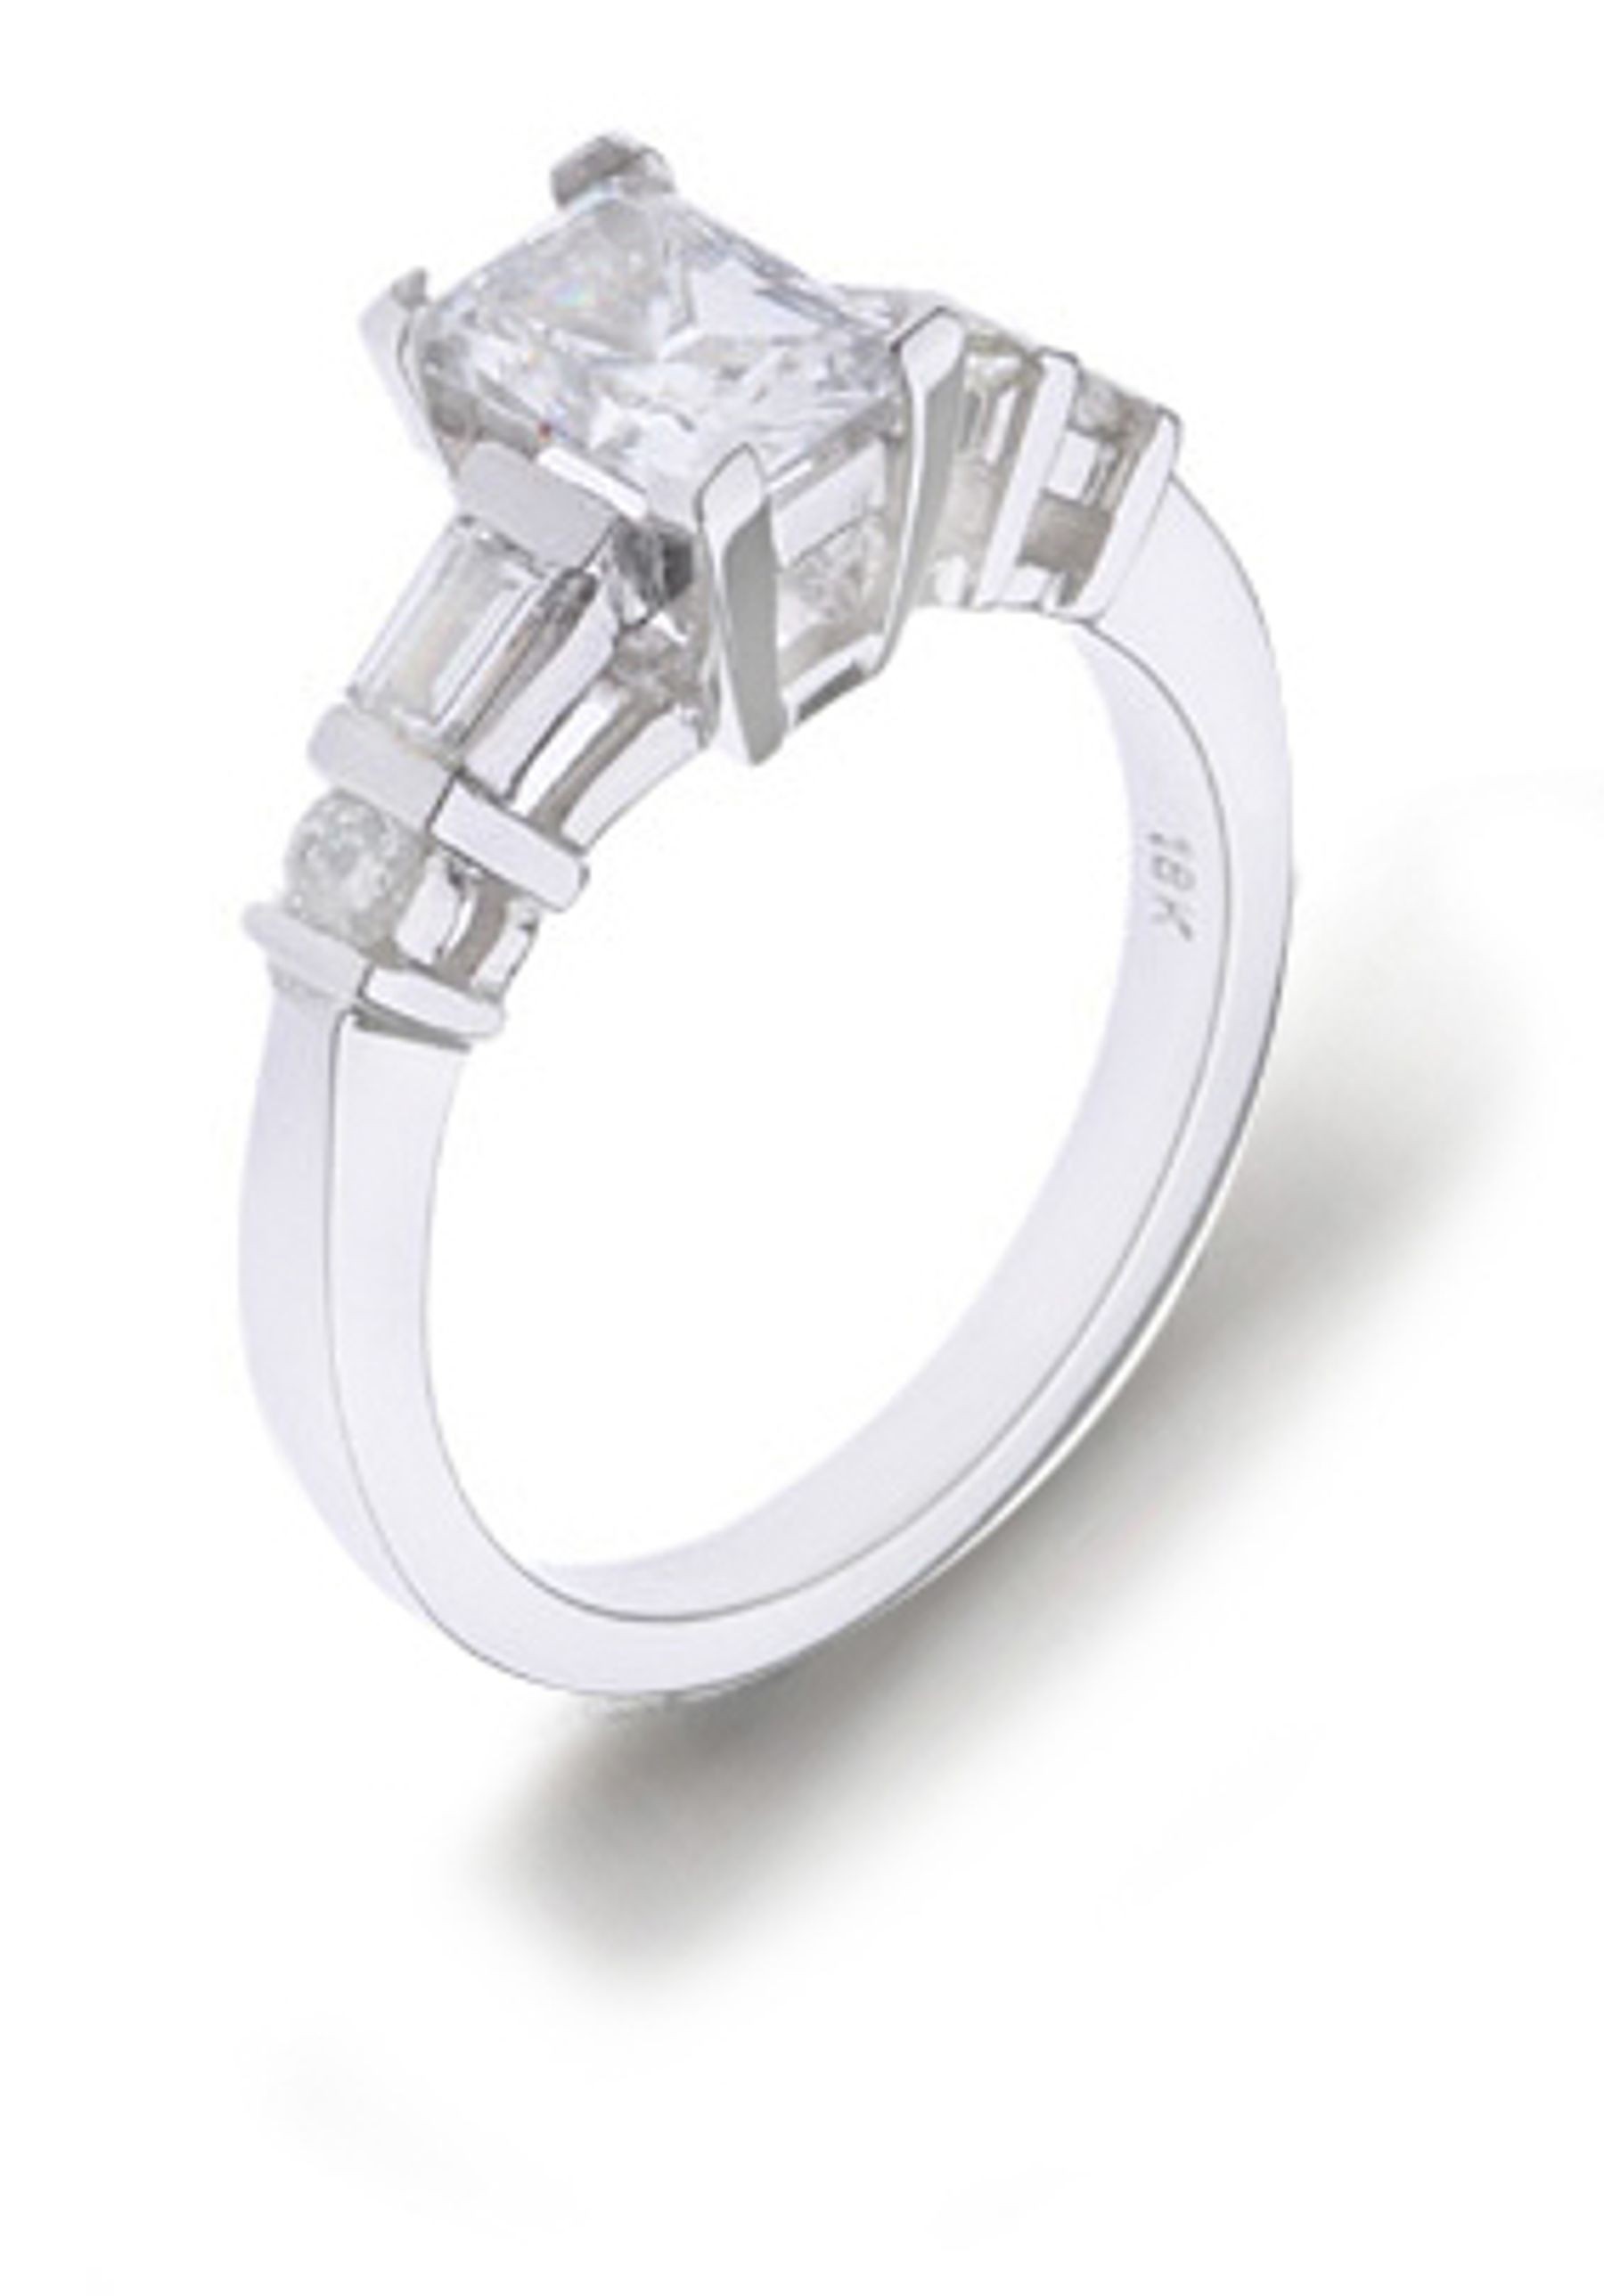 Engagement Side Accent Diamond Ring. 